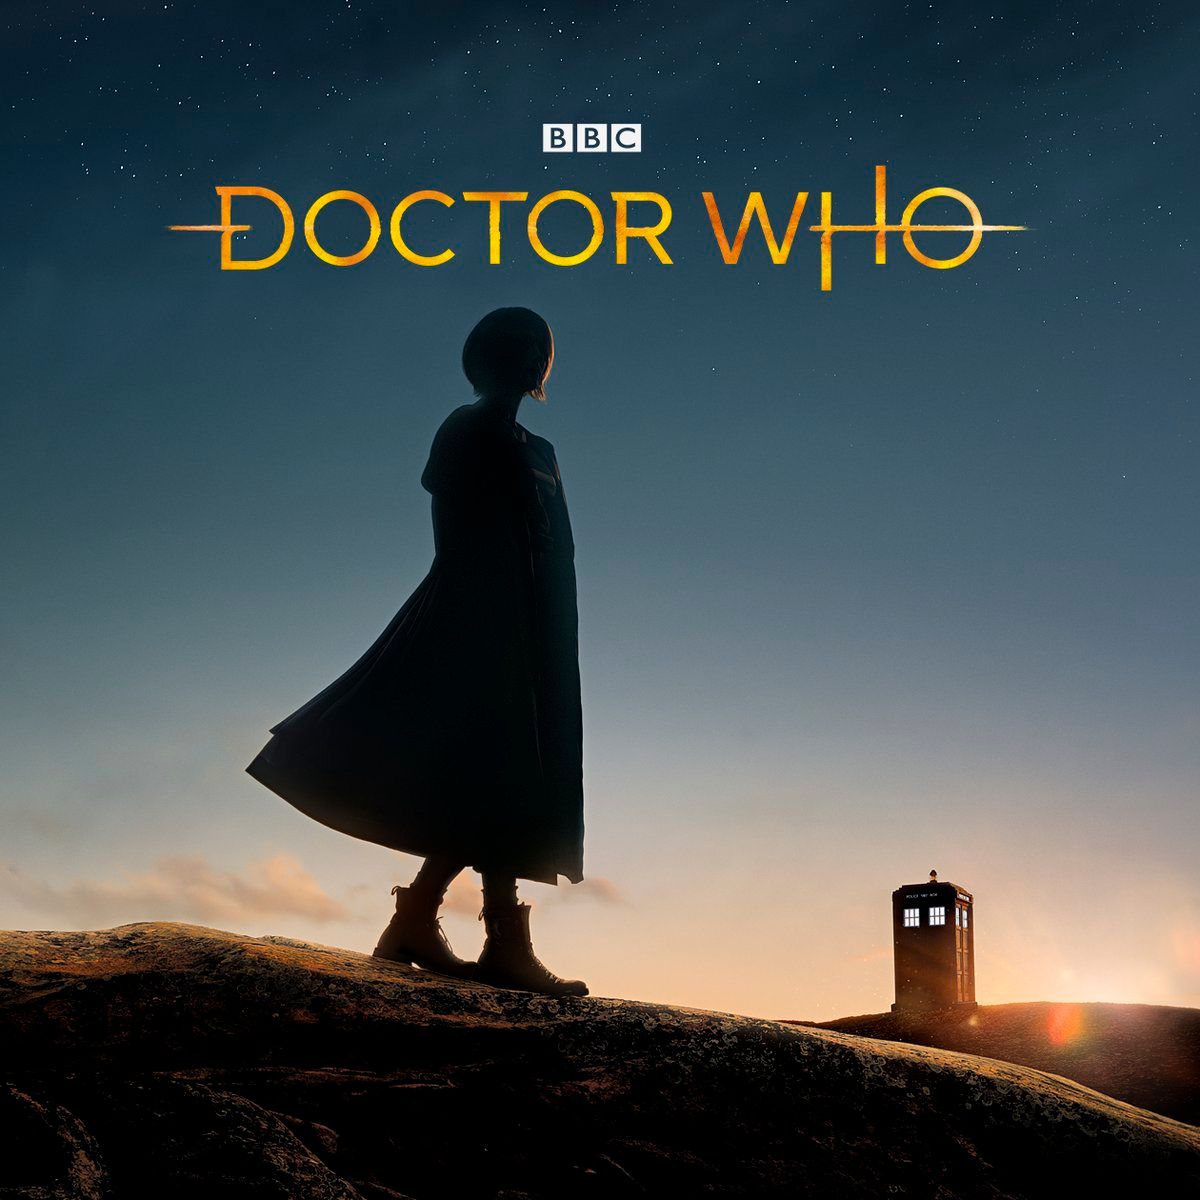 The 13th Doctor stands silhouetted in the poster for the next season of Doctor Who.